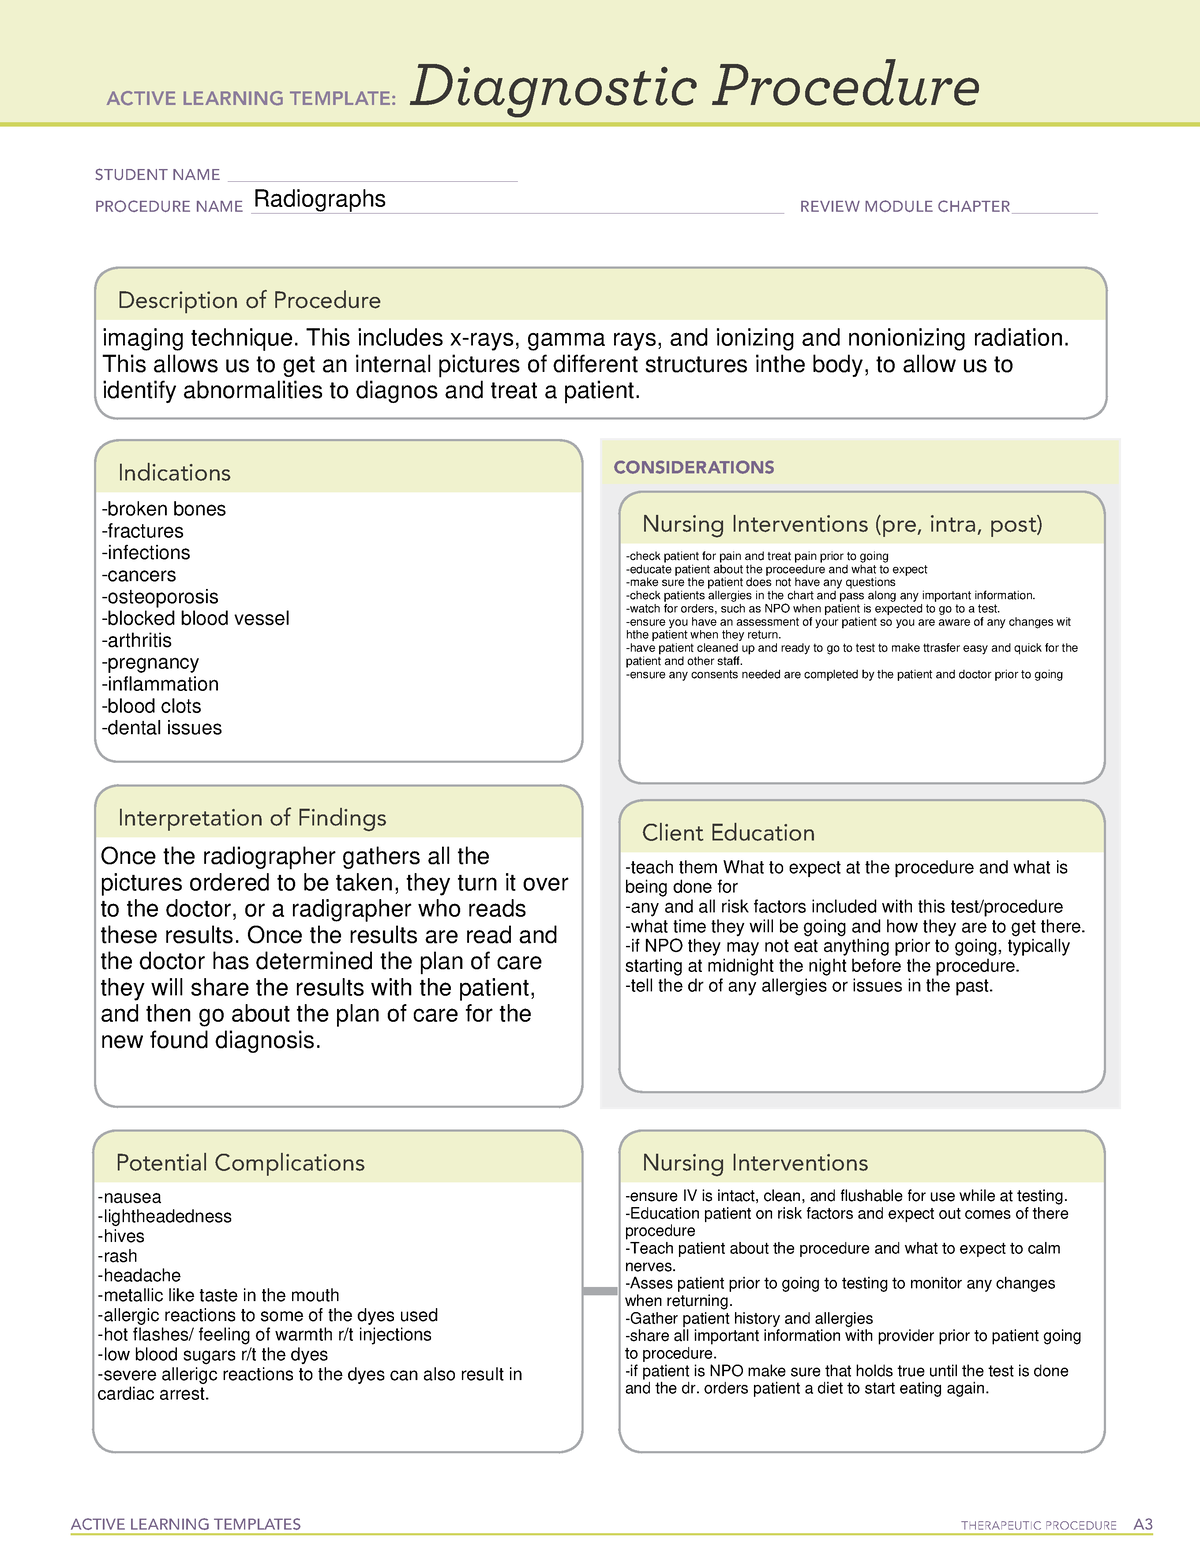 ATI Diagnostic study Radiology template - ACTIVE LEARNING TEMPLATES ...